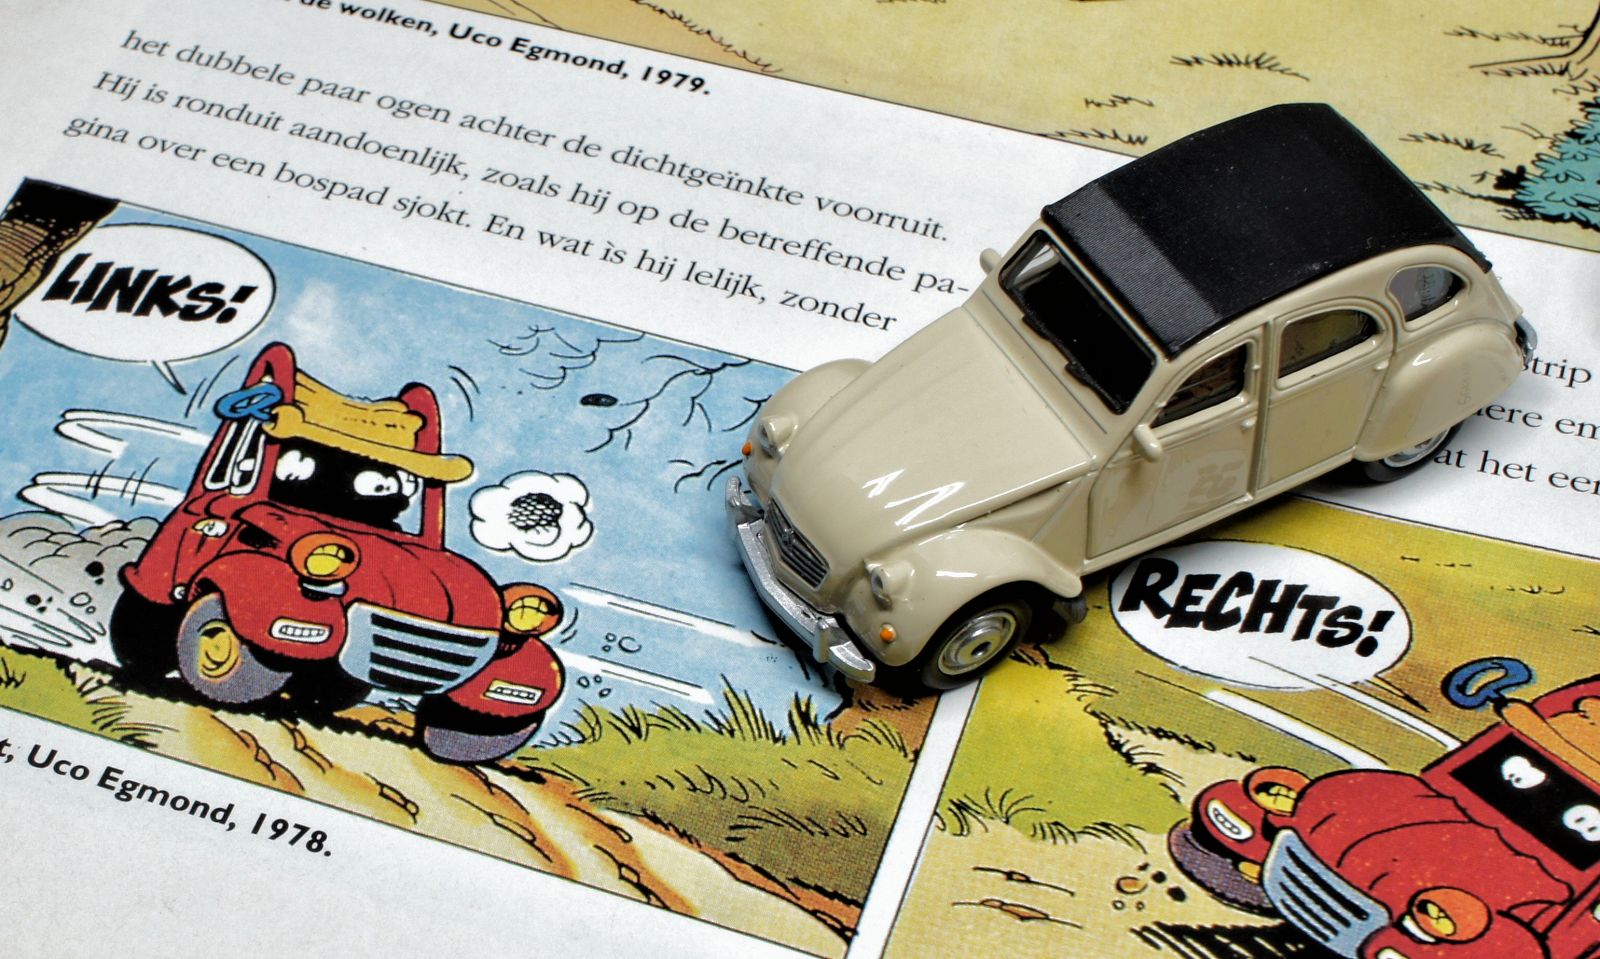 2CV and comics go well together.